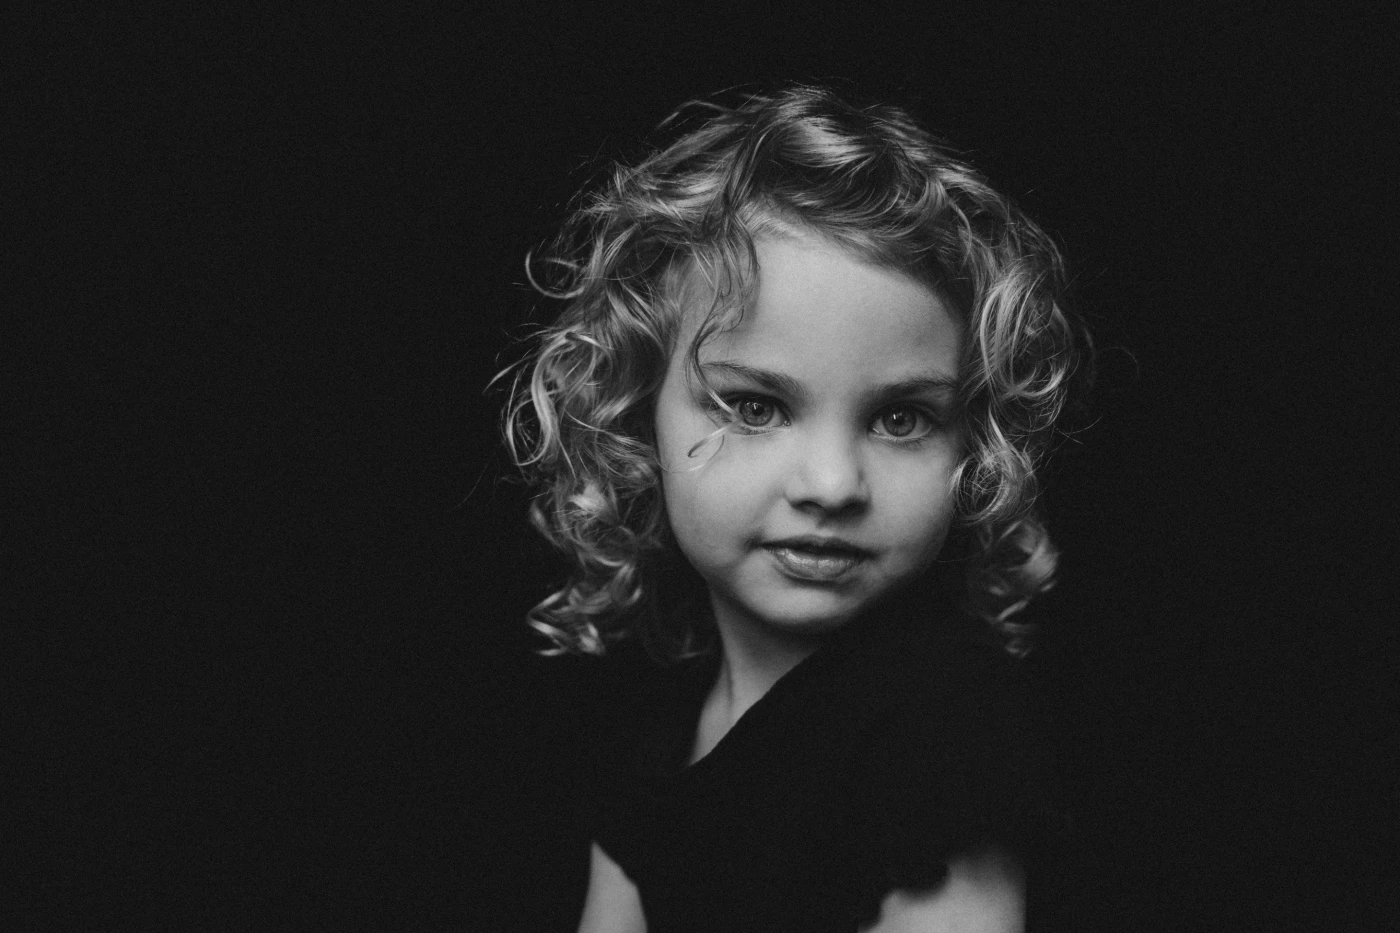 A daylight portrait of this little girl. She was a true model to photograph!